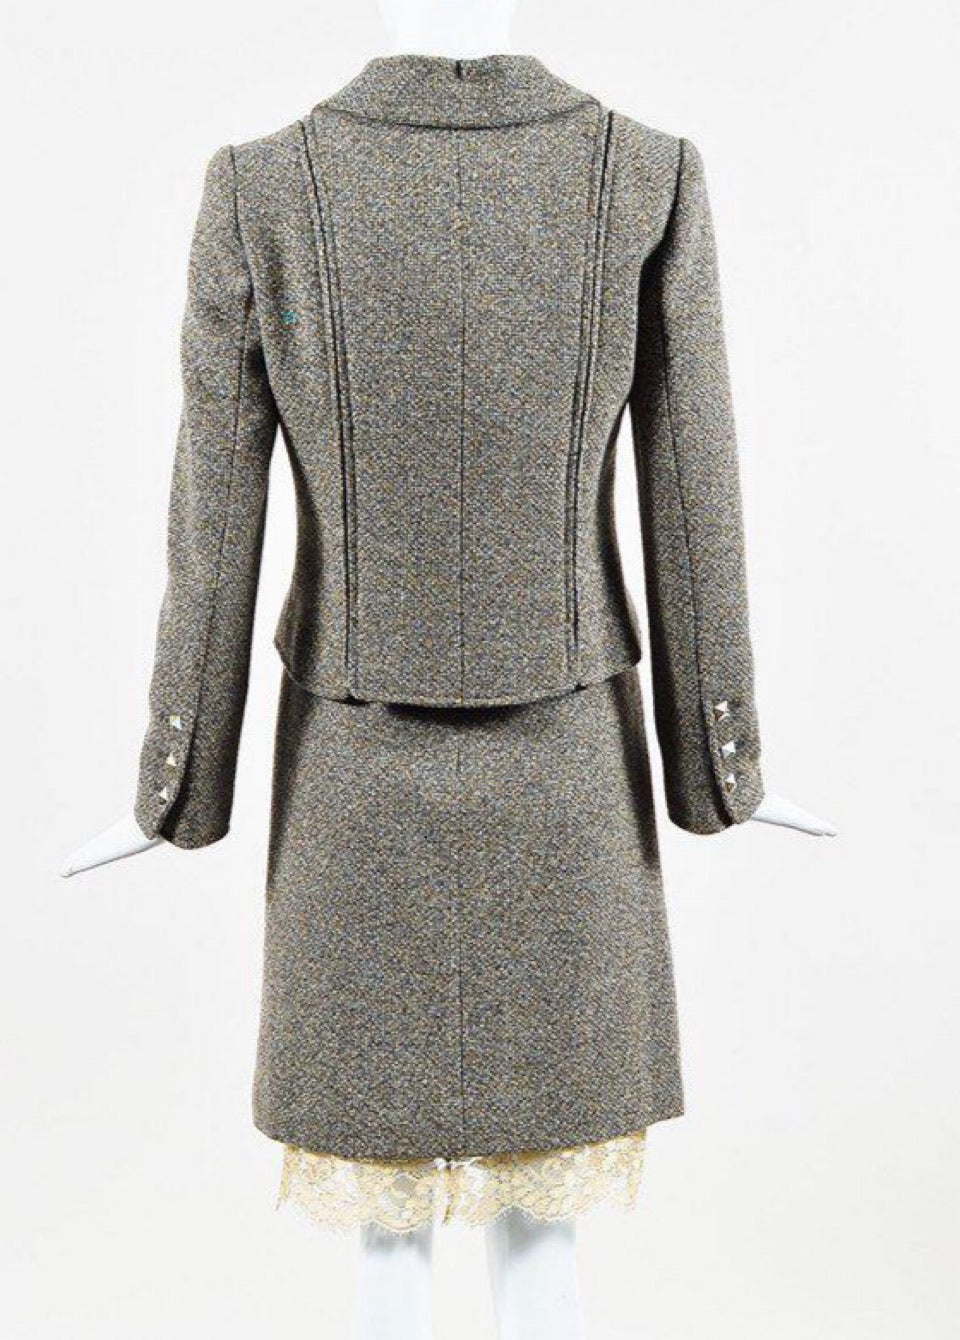 Chanel Vintage 03A, 2003 Fall Autumn Brown Tweed Lace Jacket